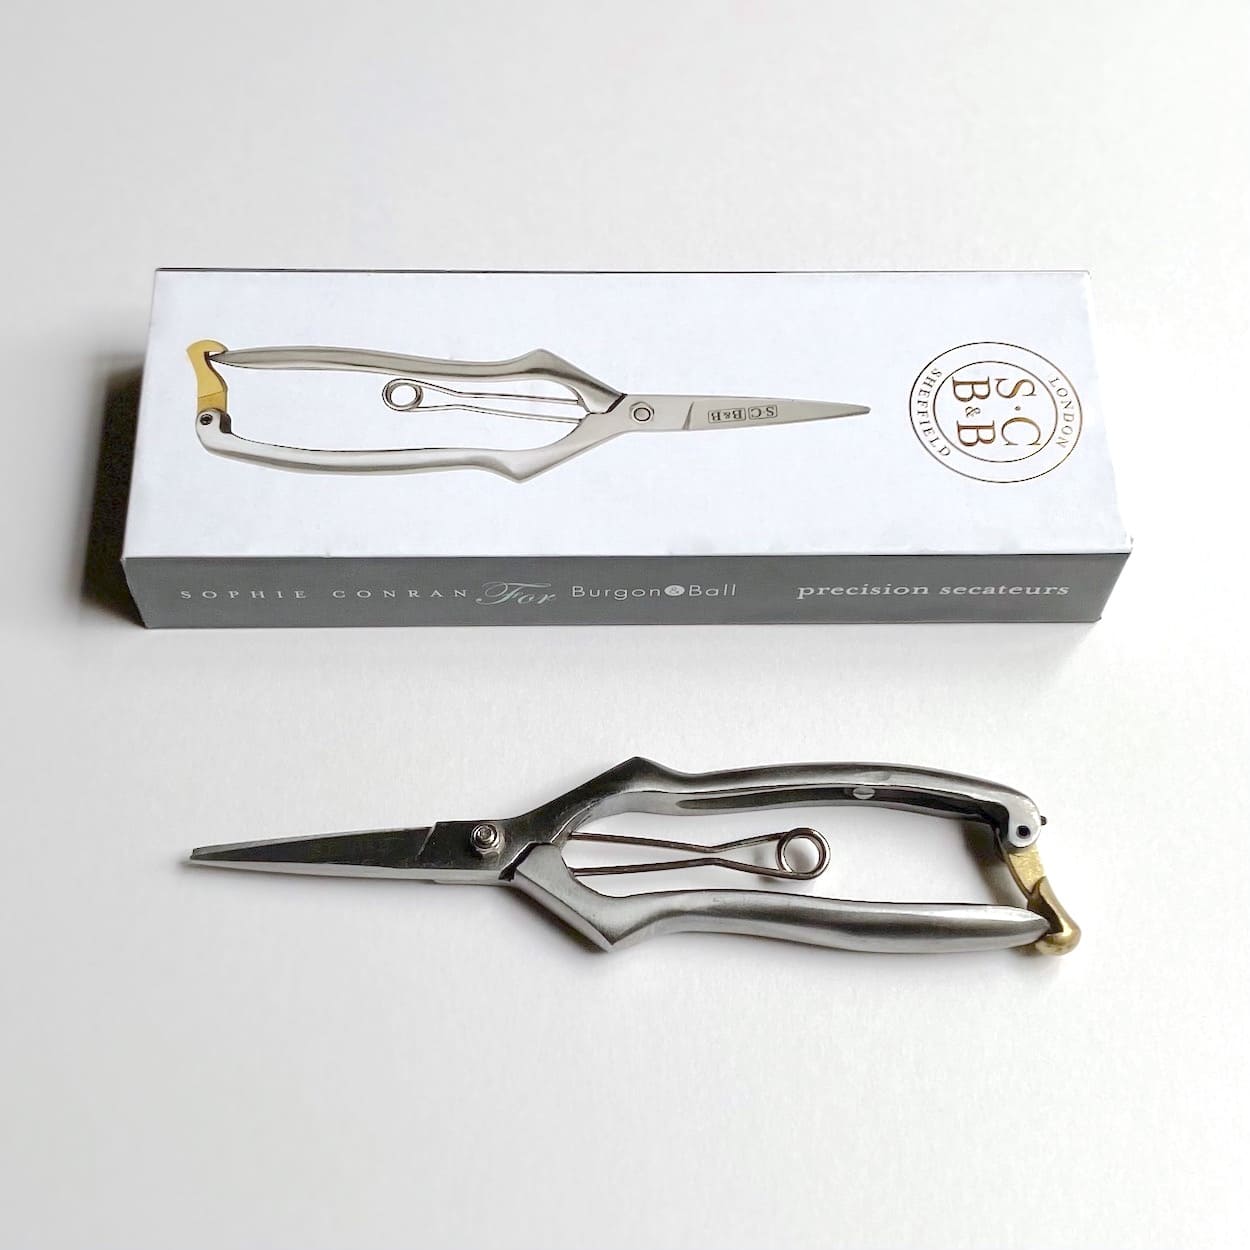 Stainless Steel Precision Secateurs